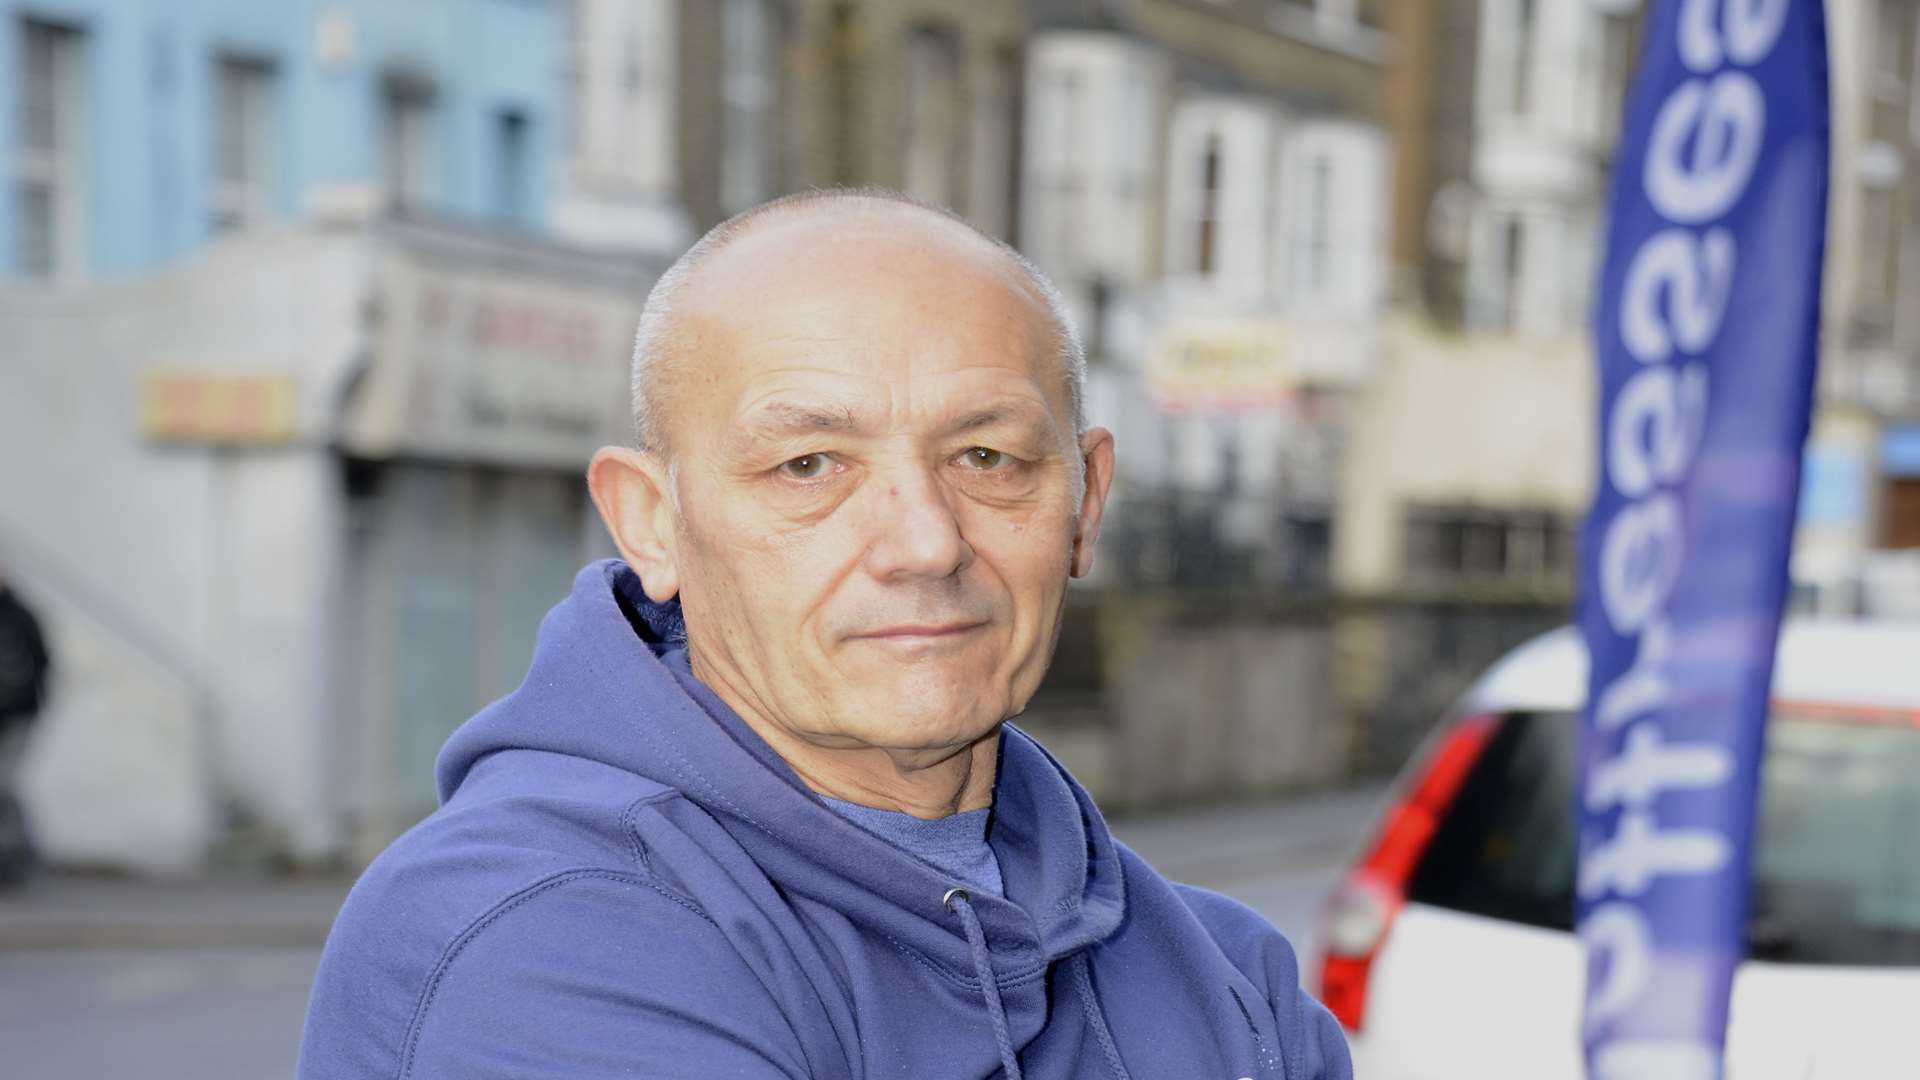 Paul Pearson - says drivers of foreign-registered cars can more easily avoid parking fines